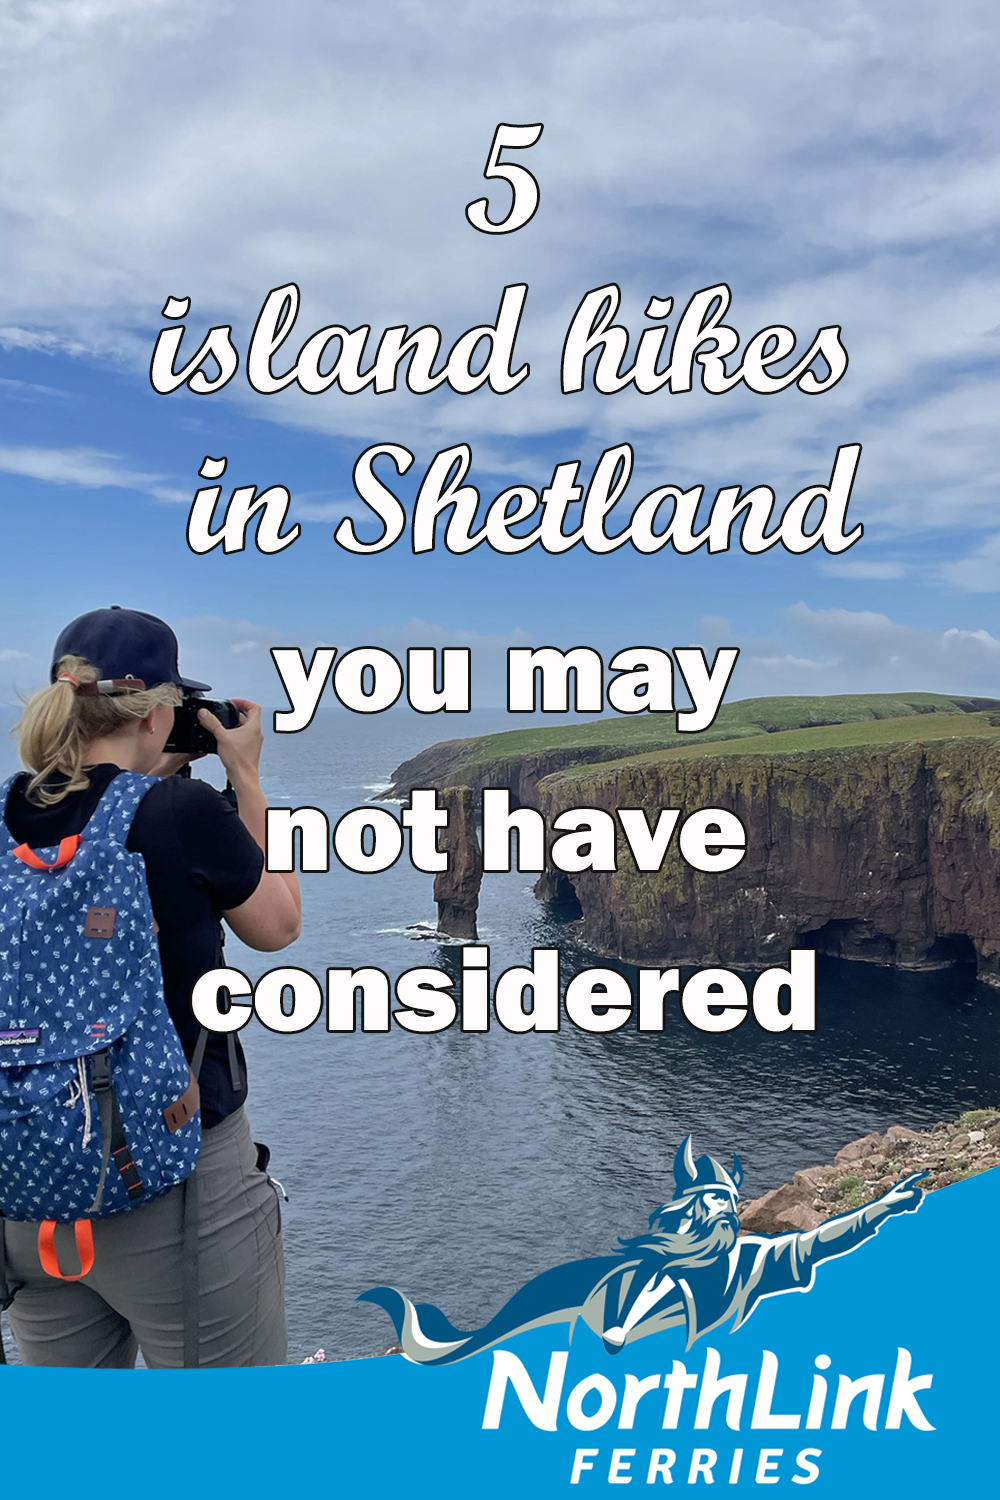 5 island walks in Shetland you may not have considered